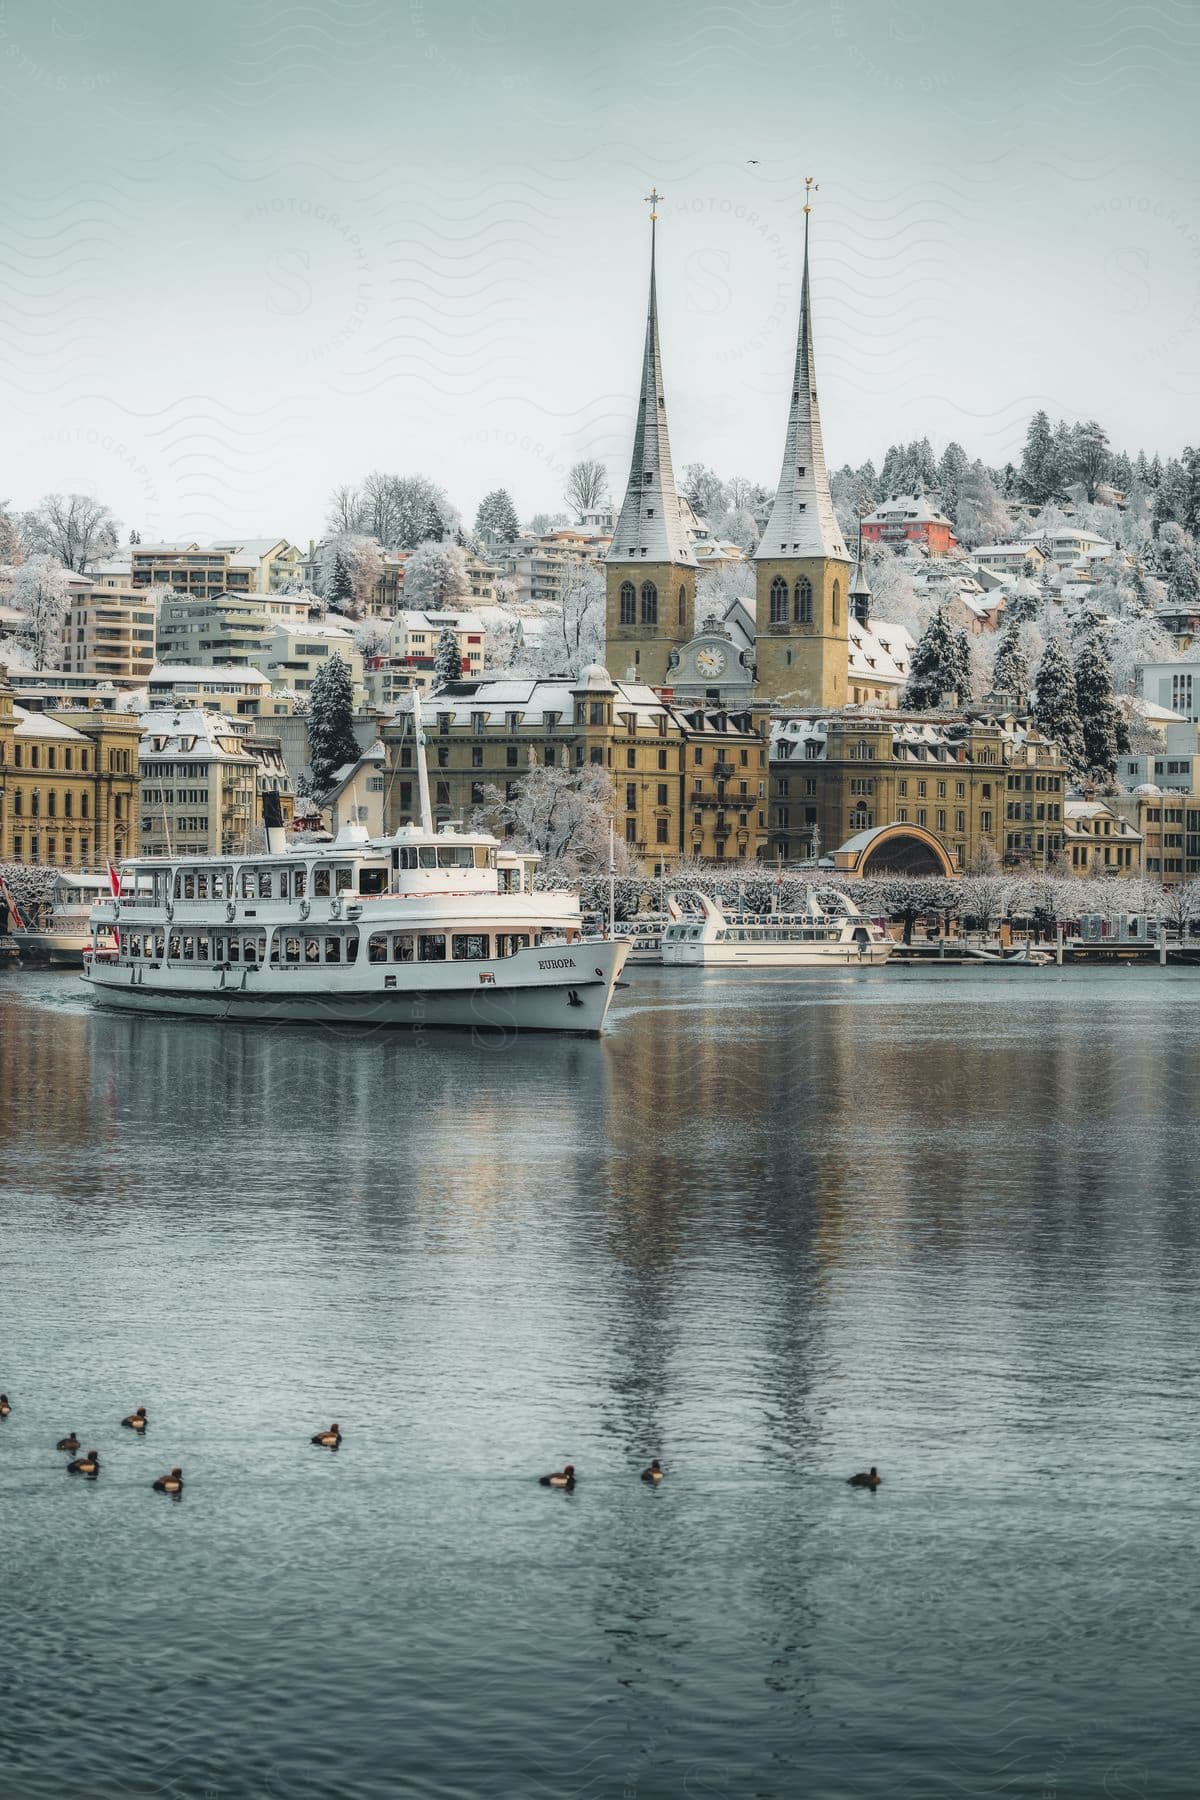 A river boat departing a city covered in snow.